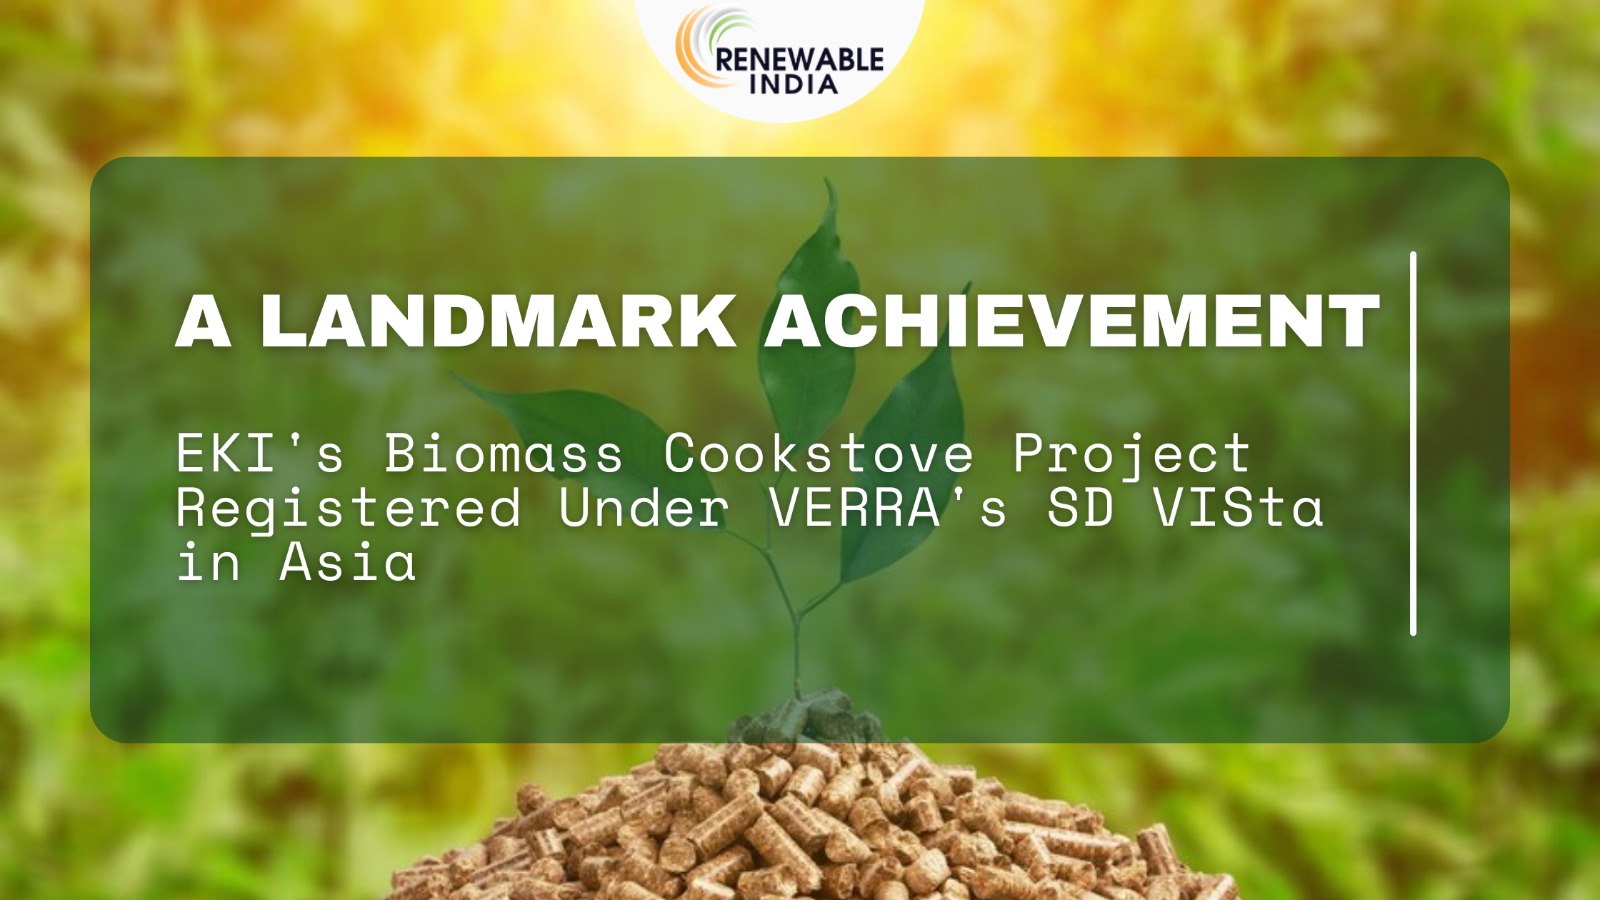 EKI Achieves Breakthrough with First-Ever Improved Biomass Cookstove Project Registered & Verified in Asia Under VERRA’s Sustainable Development Verified Impact Standard (SD VISta), Delivering Major Environmental and Community Benefits while Advancing SDG Contributions